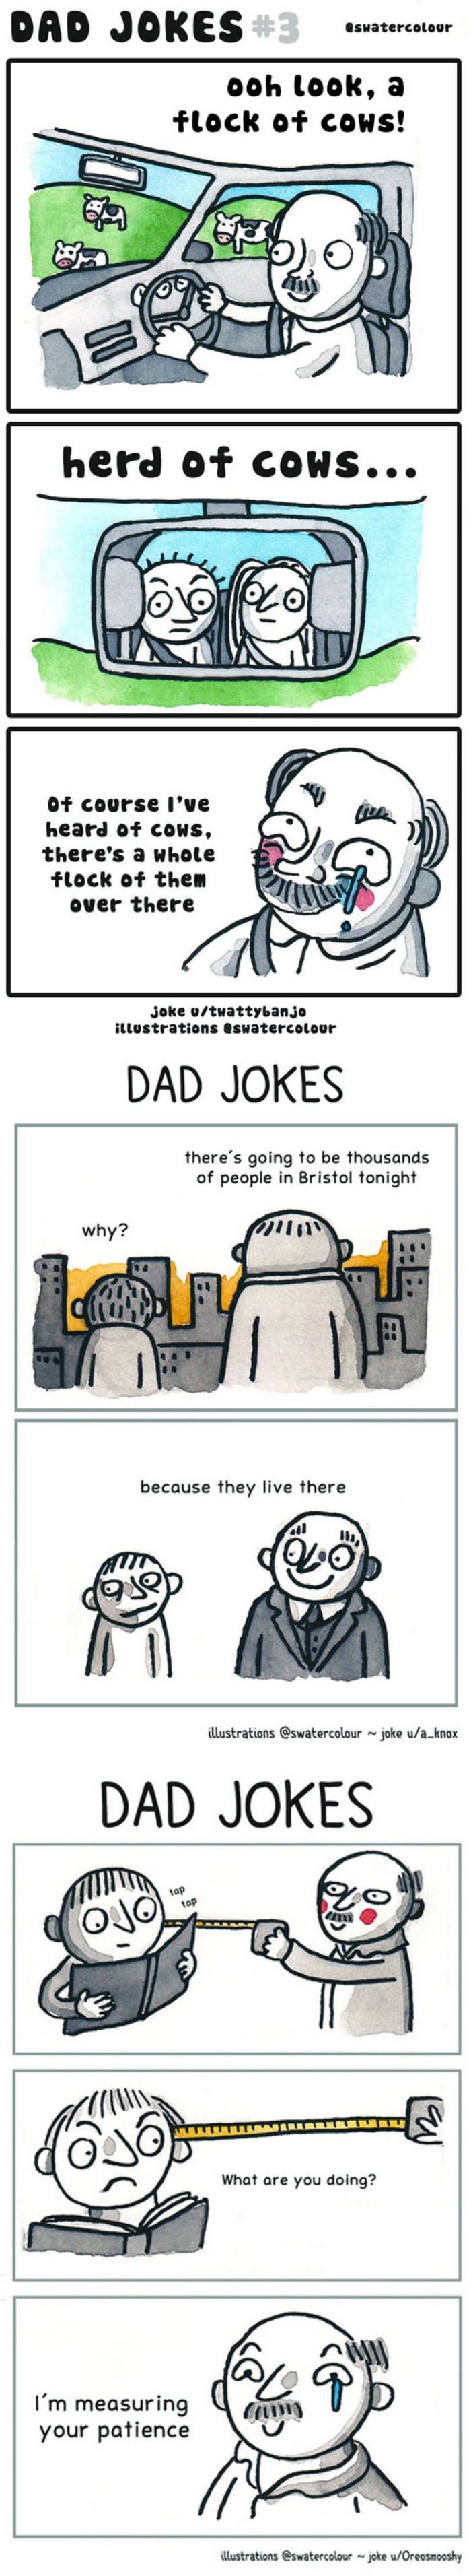 some dad jokes funny picture